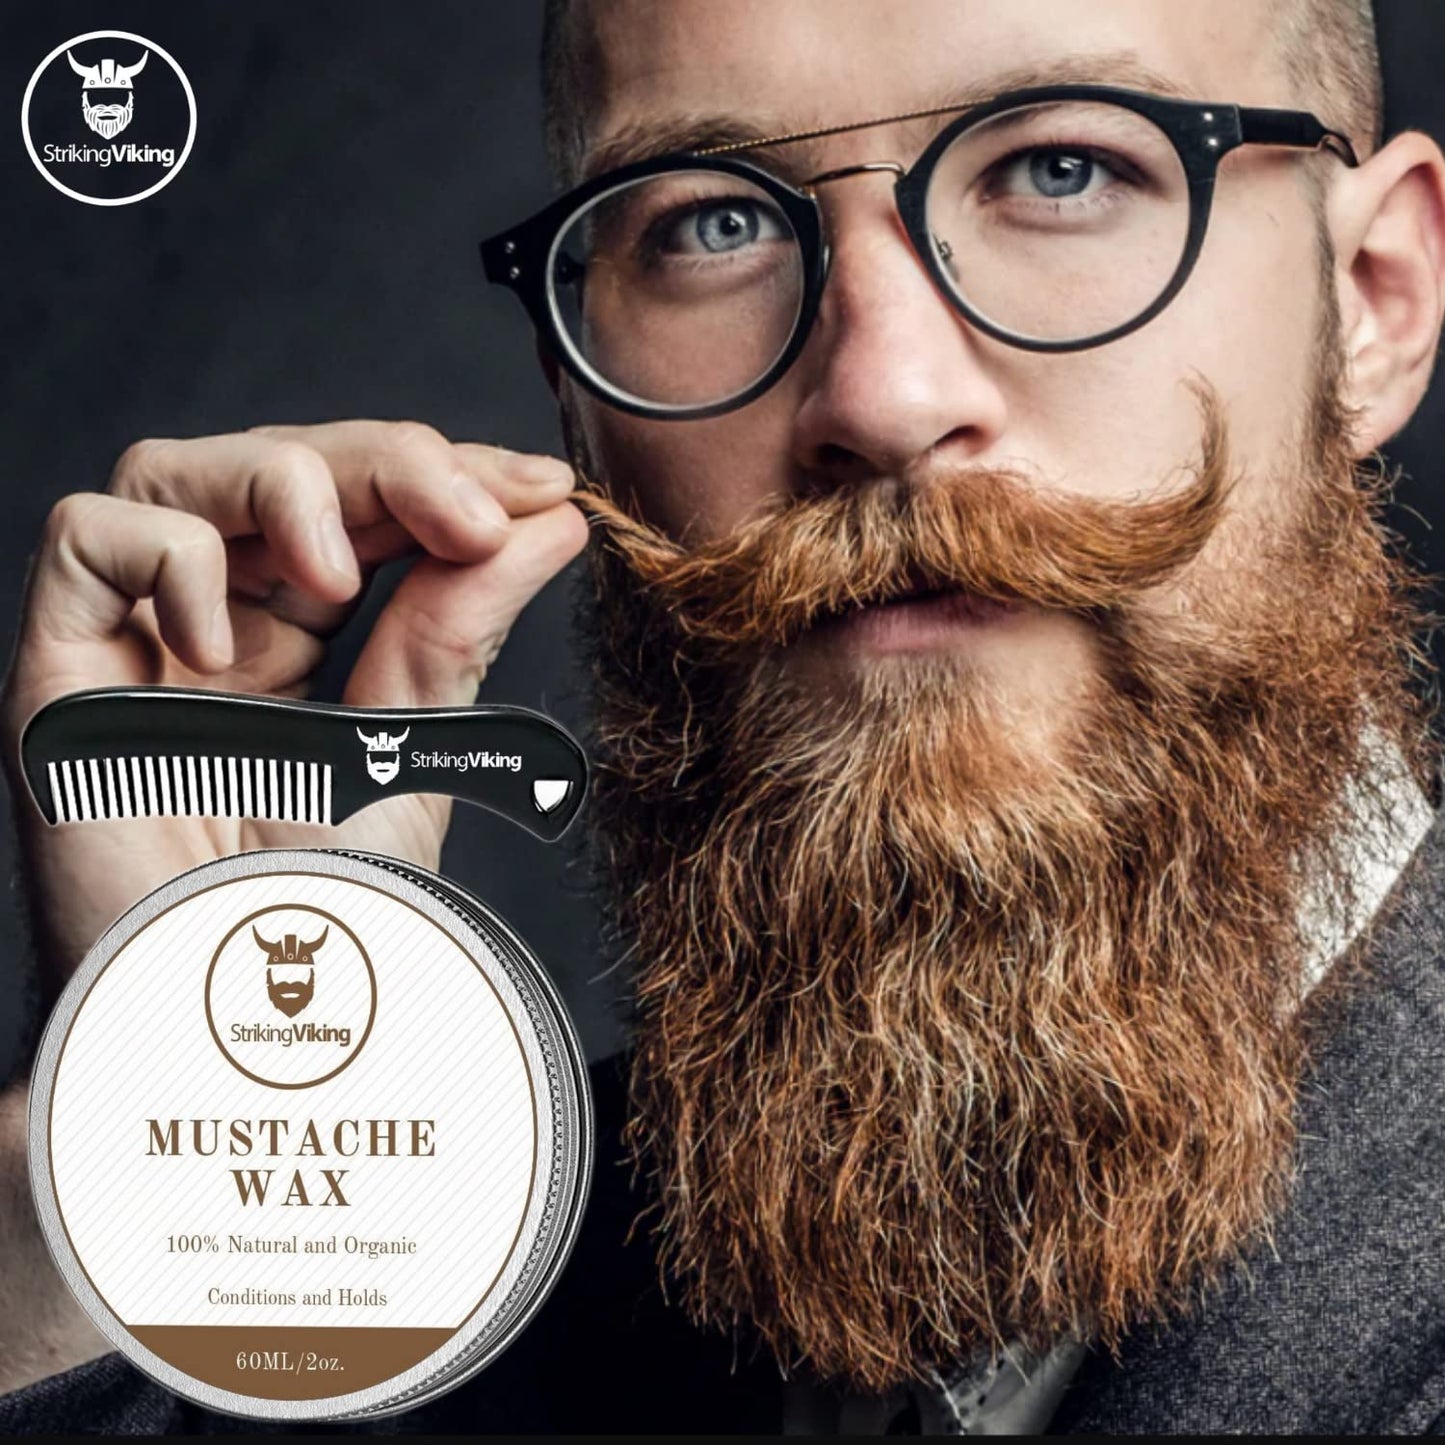 Striking Viking Mustache Wax & Comb Kit - Beard & Moustache Wax For Men With Strong Hold Natural Beeswax - Helps Tame Style & Groom (Sandalwood Scent, 2 Ounce Size) - Mustache Styling Wax